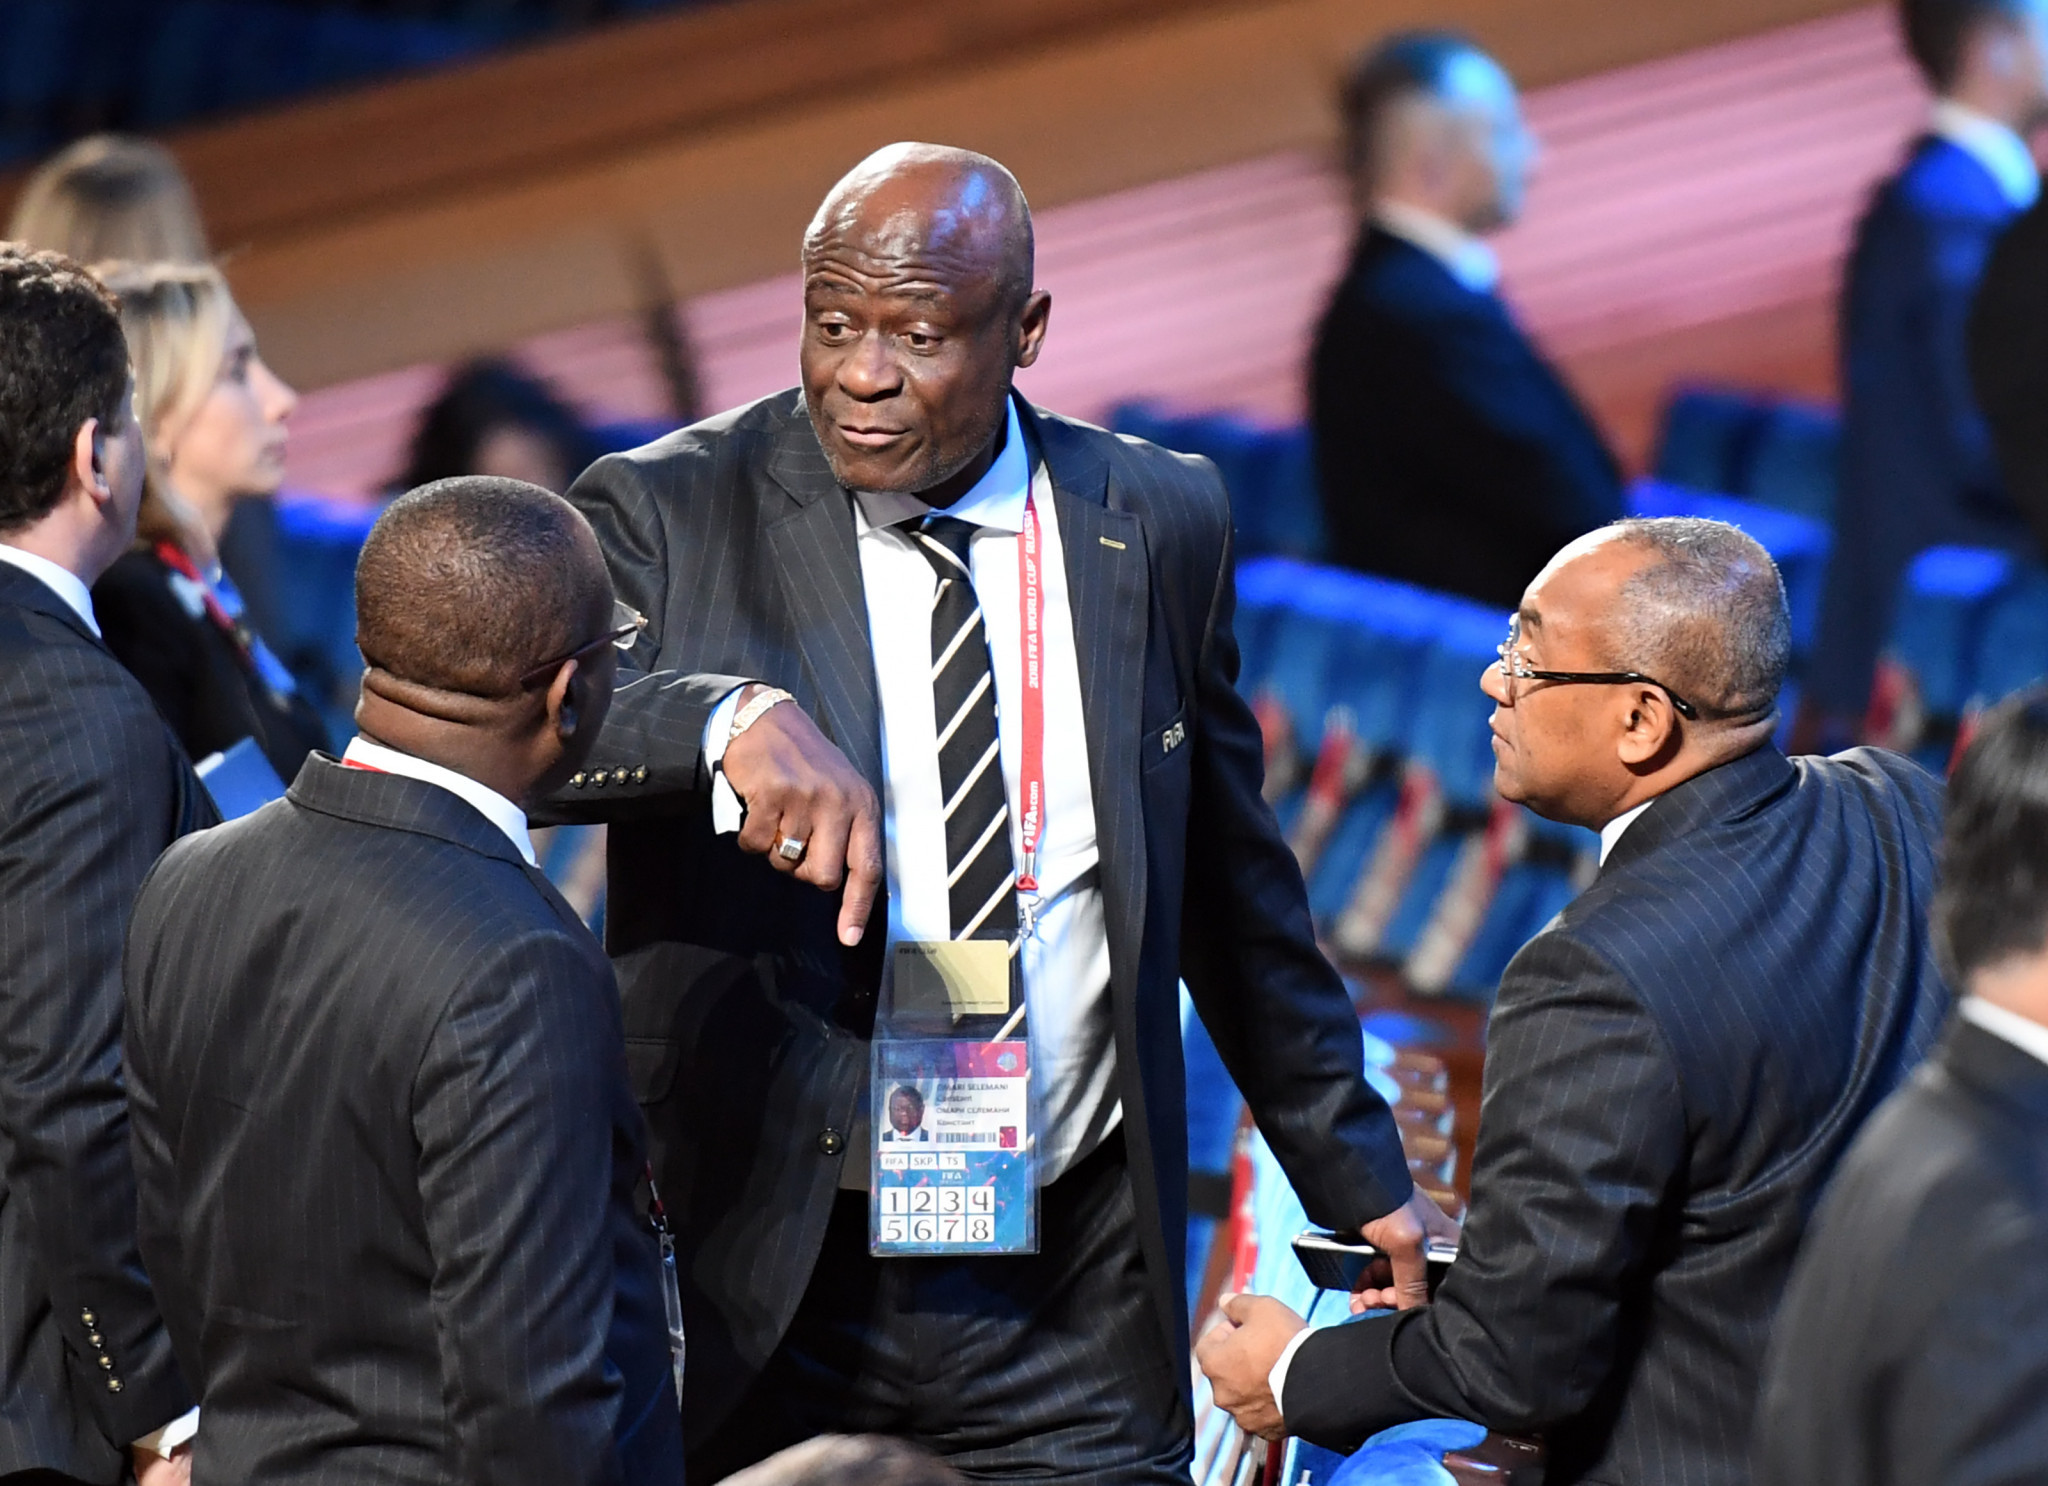 FIFA Council member claims DR Congo Sports Minister behind arrest on corruption charges after released from detention